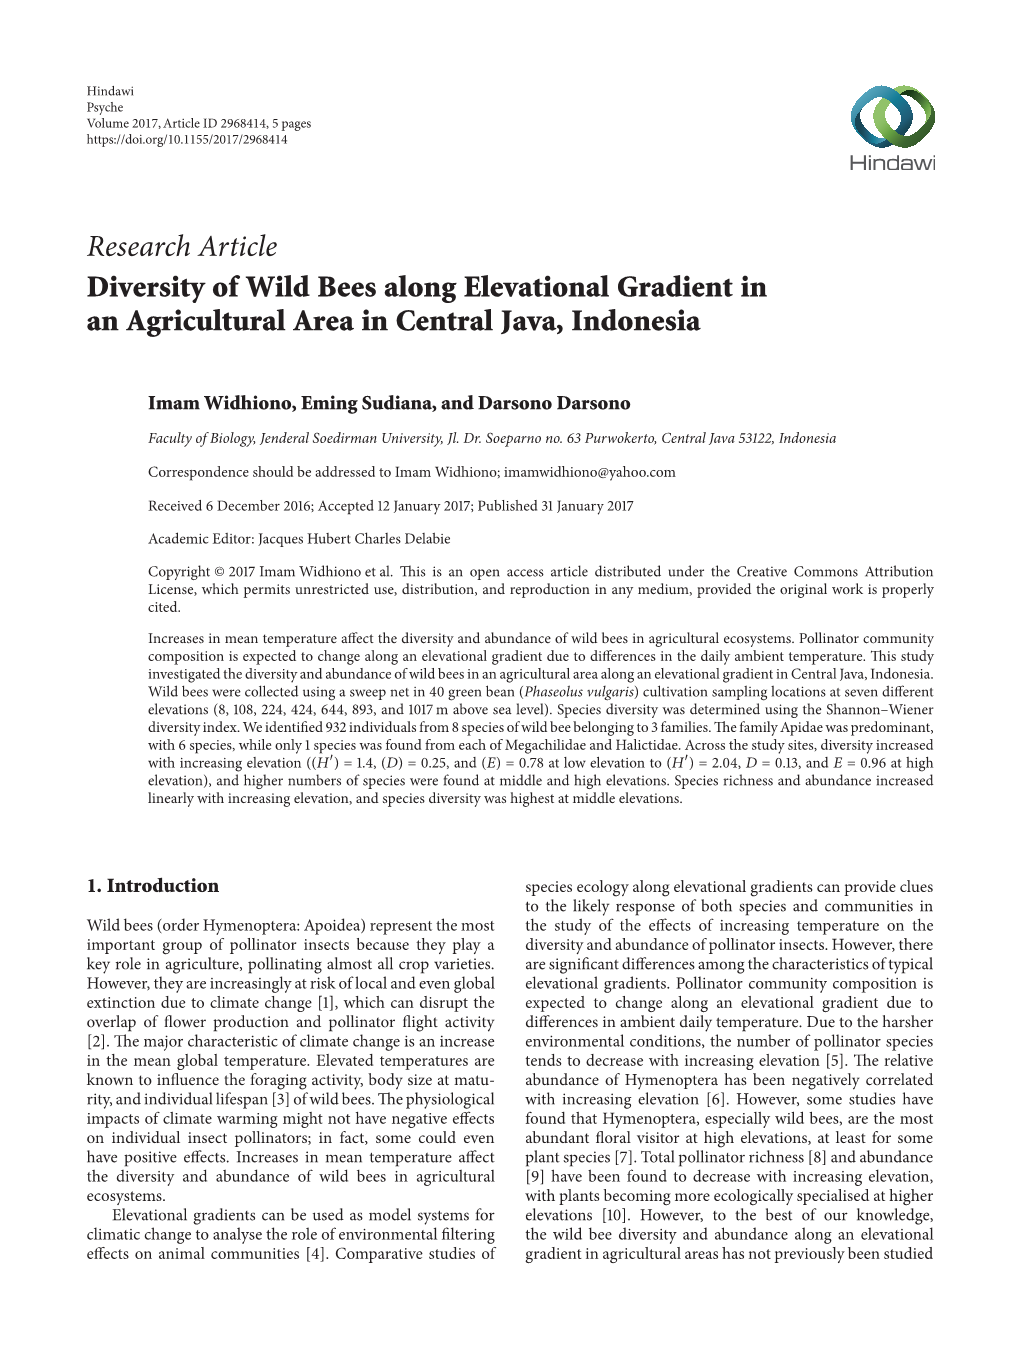 Research Article Diversity of Wild Bees Along Elevational Gradient in an Agricultural Area in Central Java, Indonesia